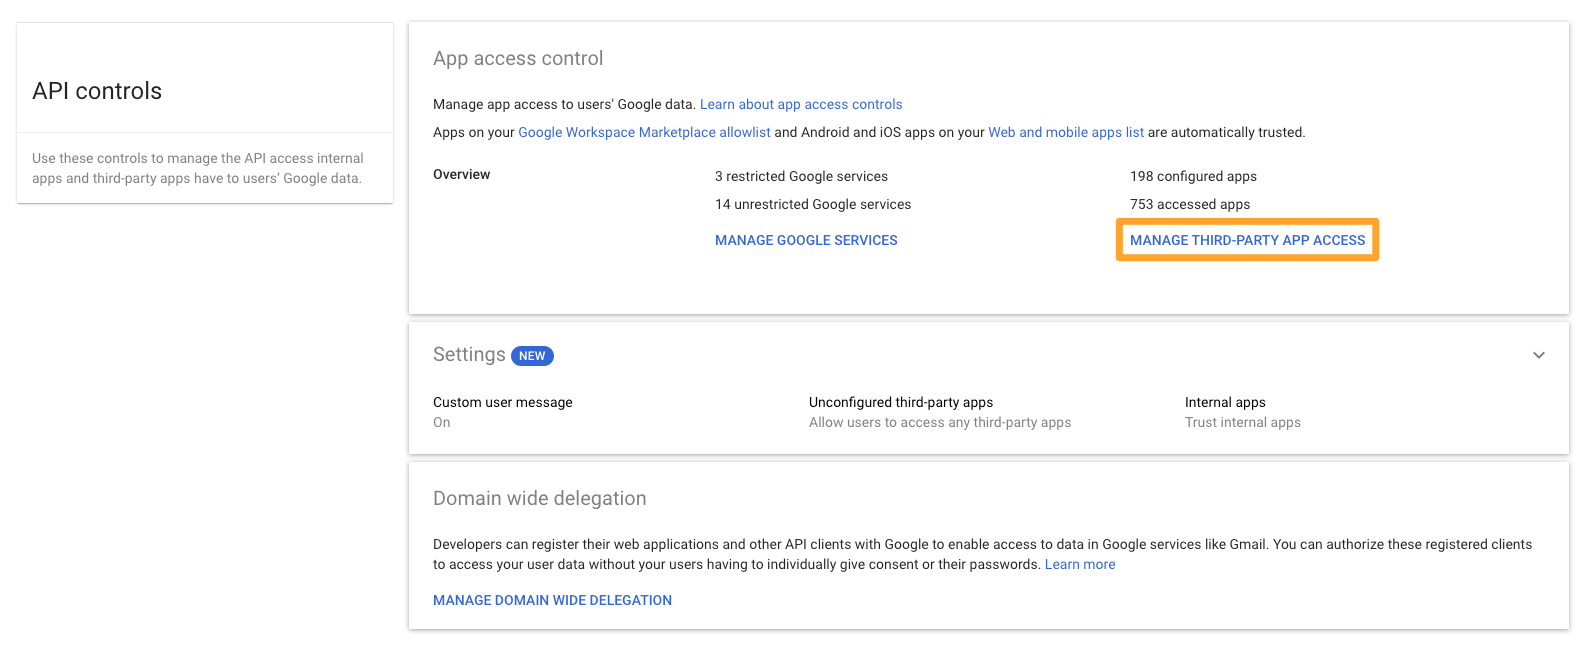 Google Admin API controls page with Manage third party app access button highlighted under app access control